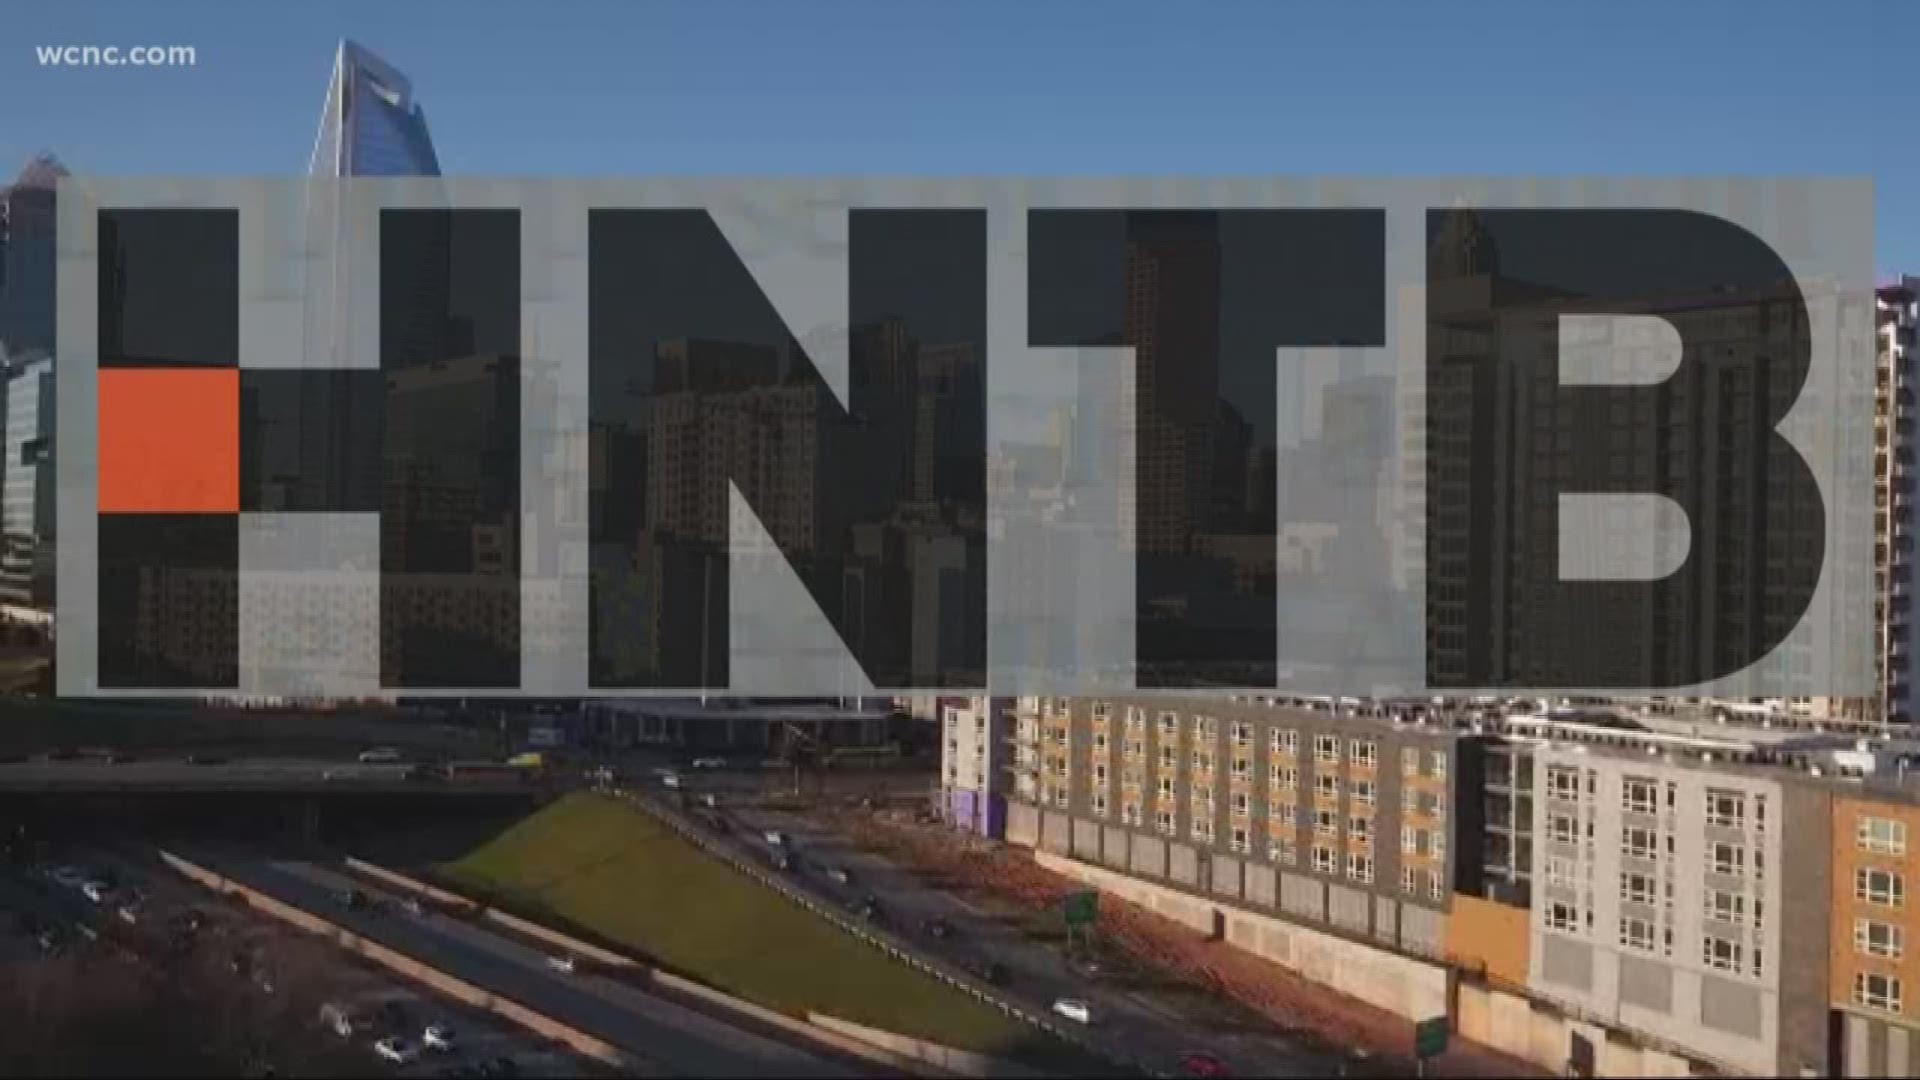 A review of public records also found HNTB reportedly improperly billed two other government agencies in two other states in recent years. The City of Charlotte won't say if it is now reviewing the additional HNTB contracts.